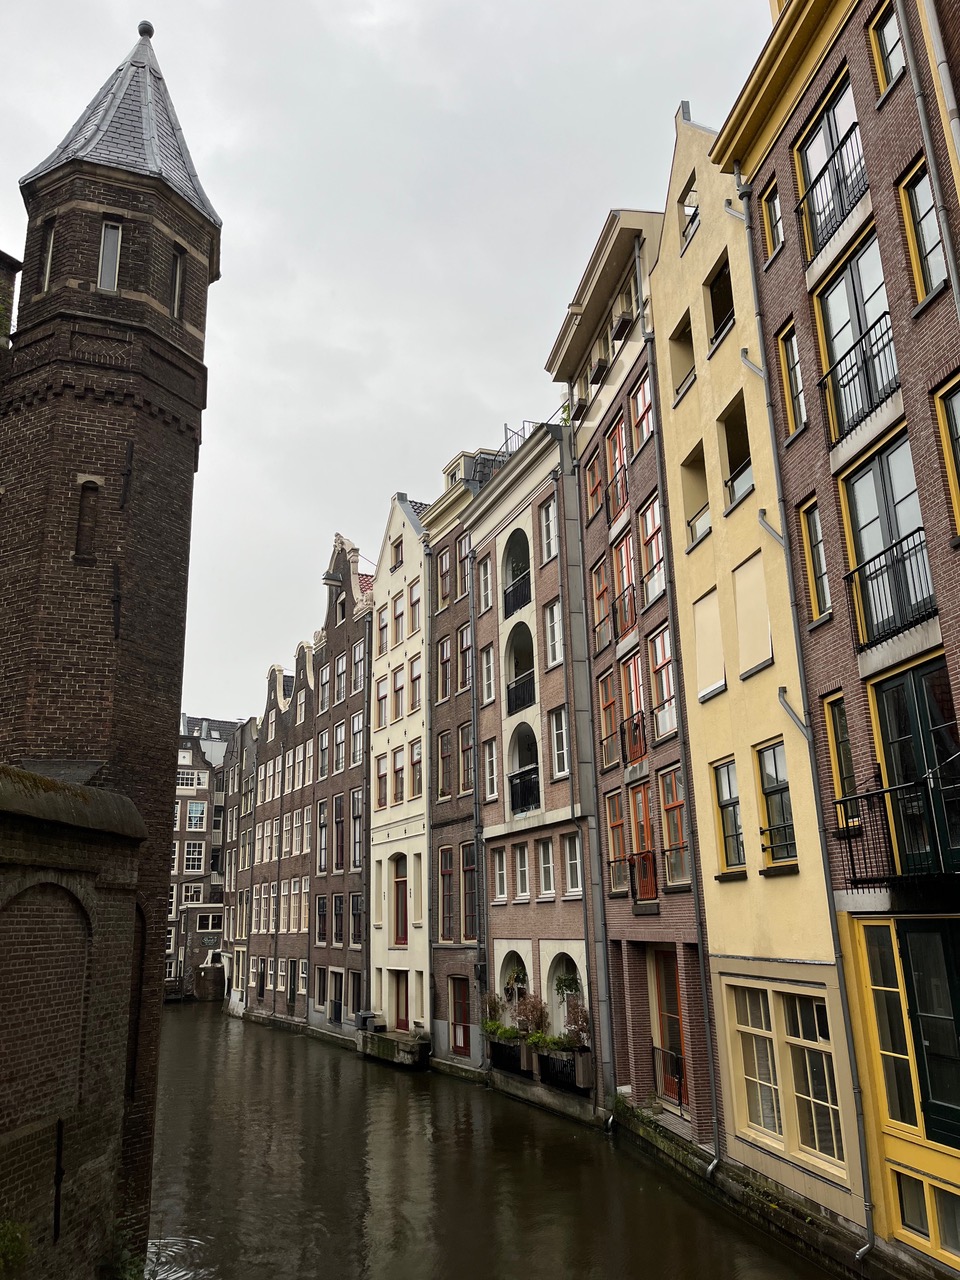 Narrow Amsterdam canal with row houses